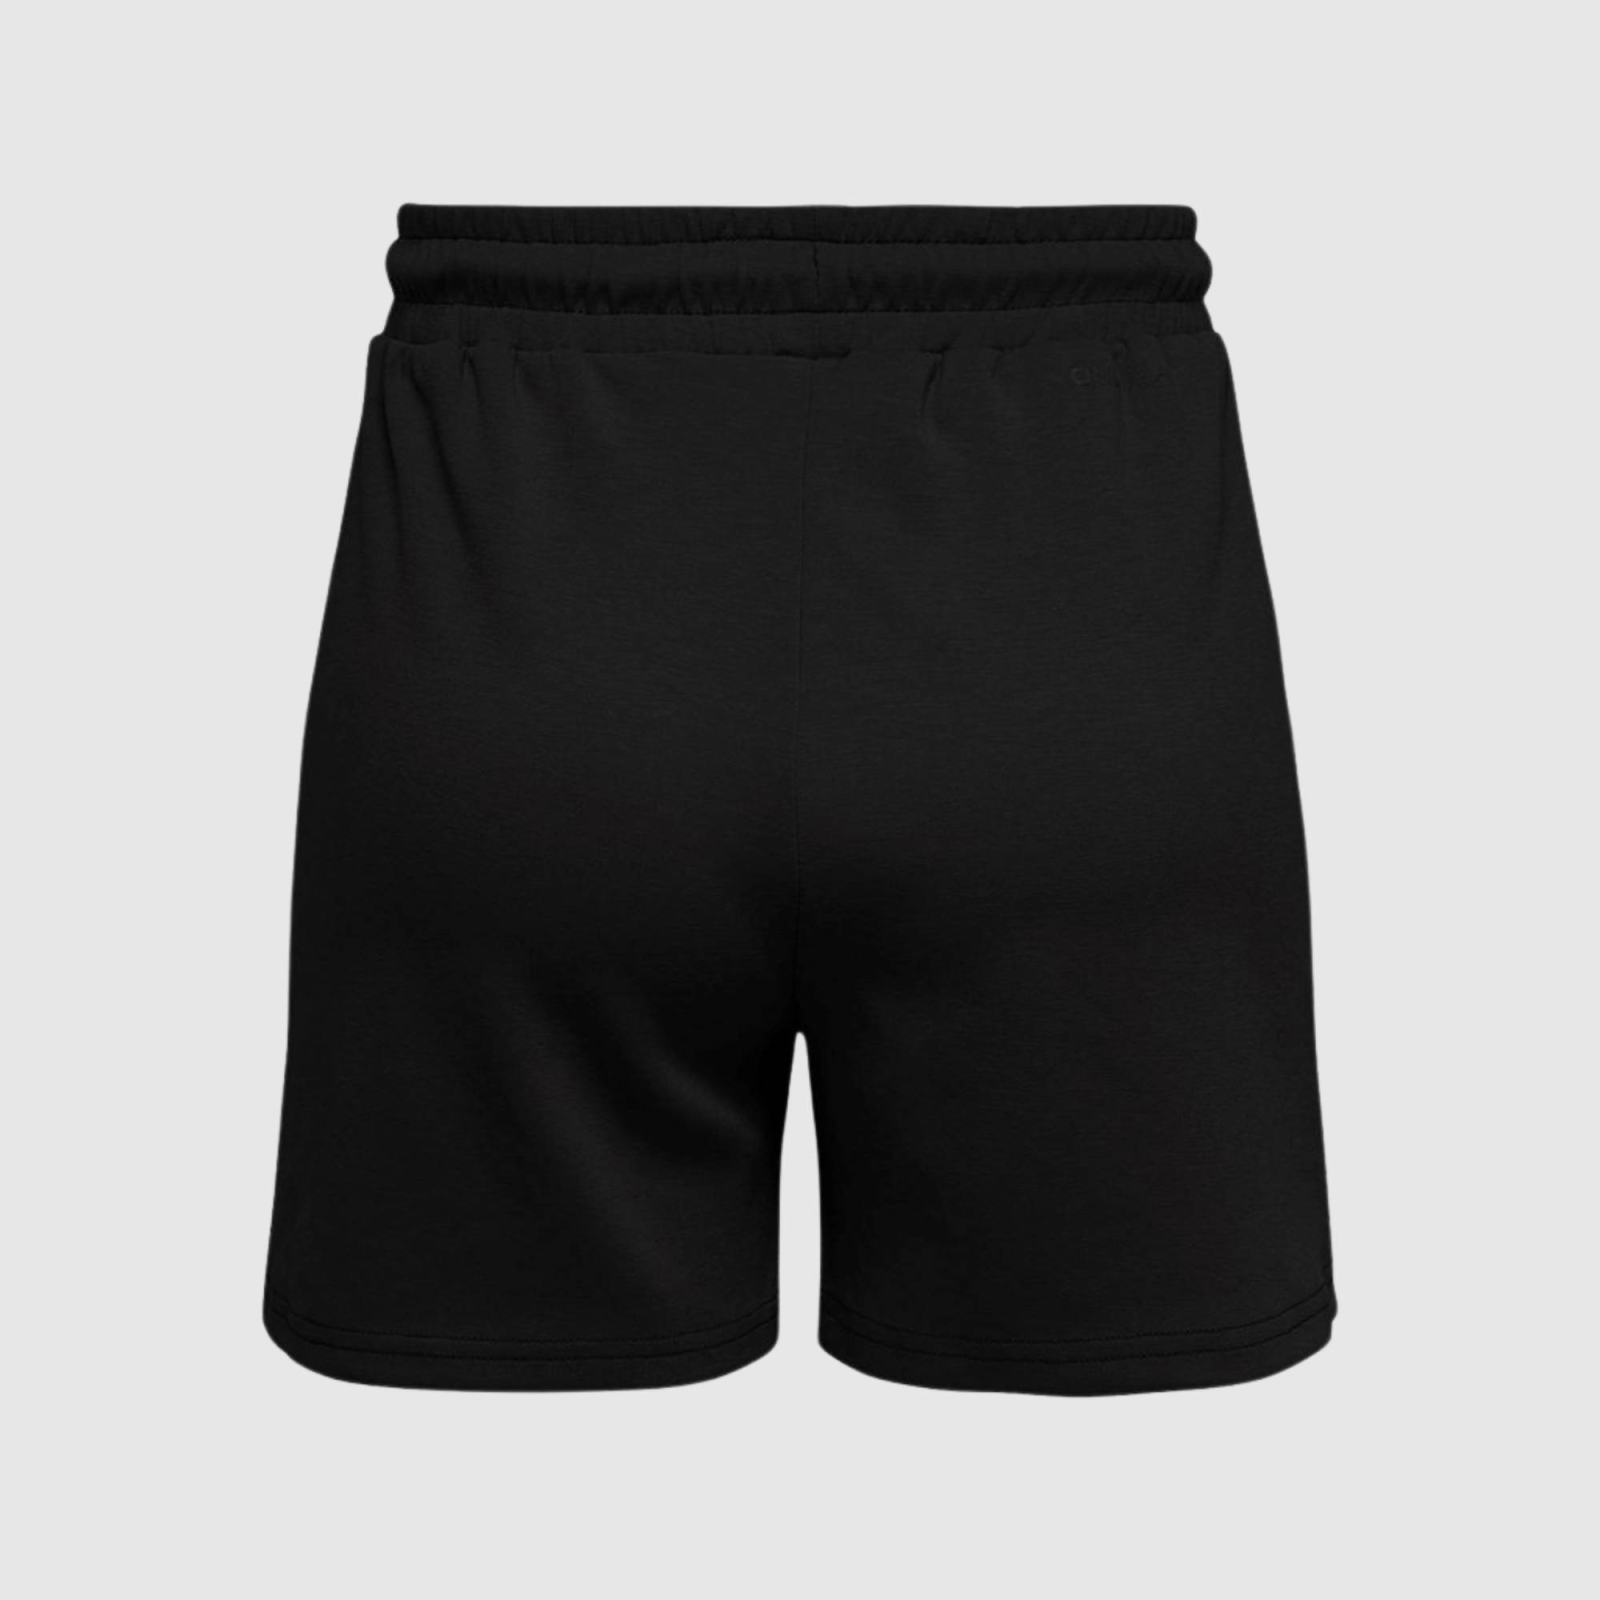 ONLY PLAY LOUNGE LIFE HIGH WEIST SWEAT SHORTS